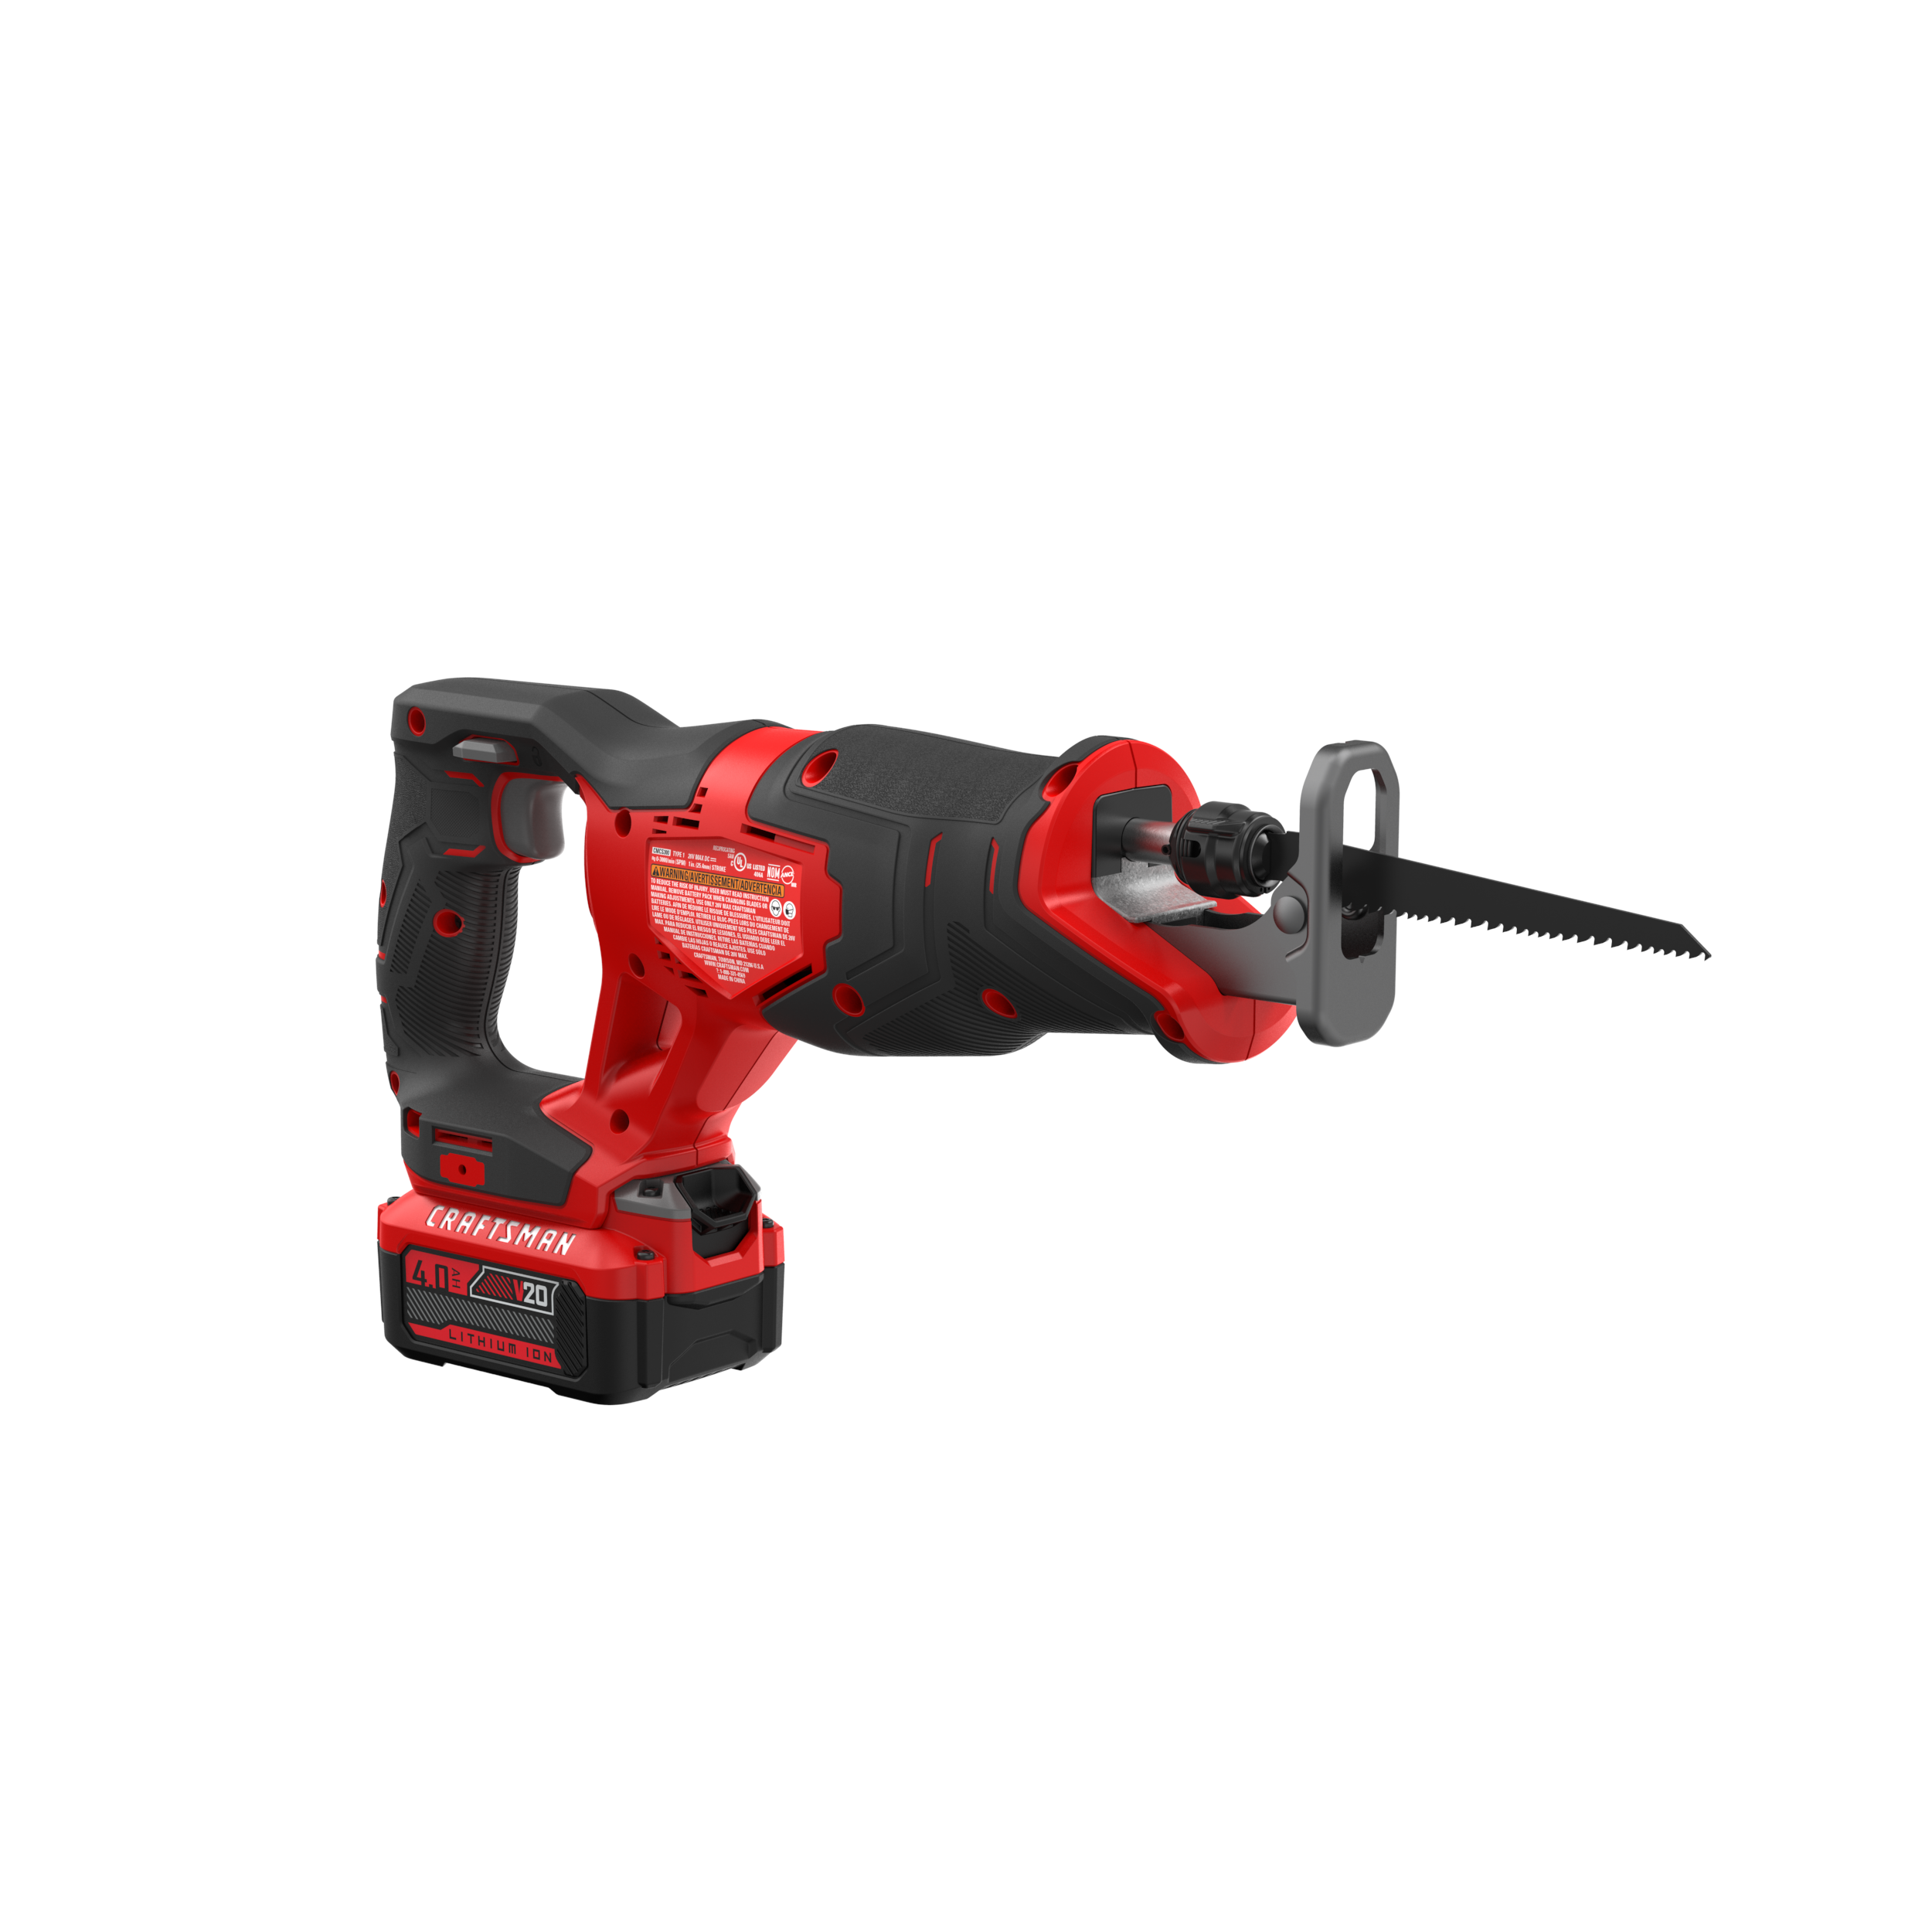 20 Volt Max* 1/2-Inch Compact Reciprocating Saw (Battery and